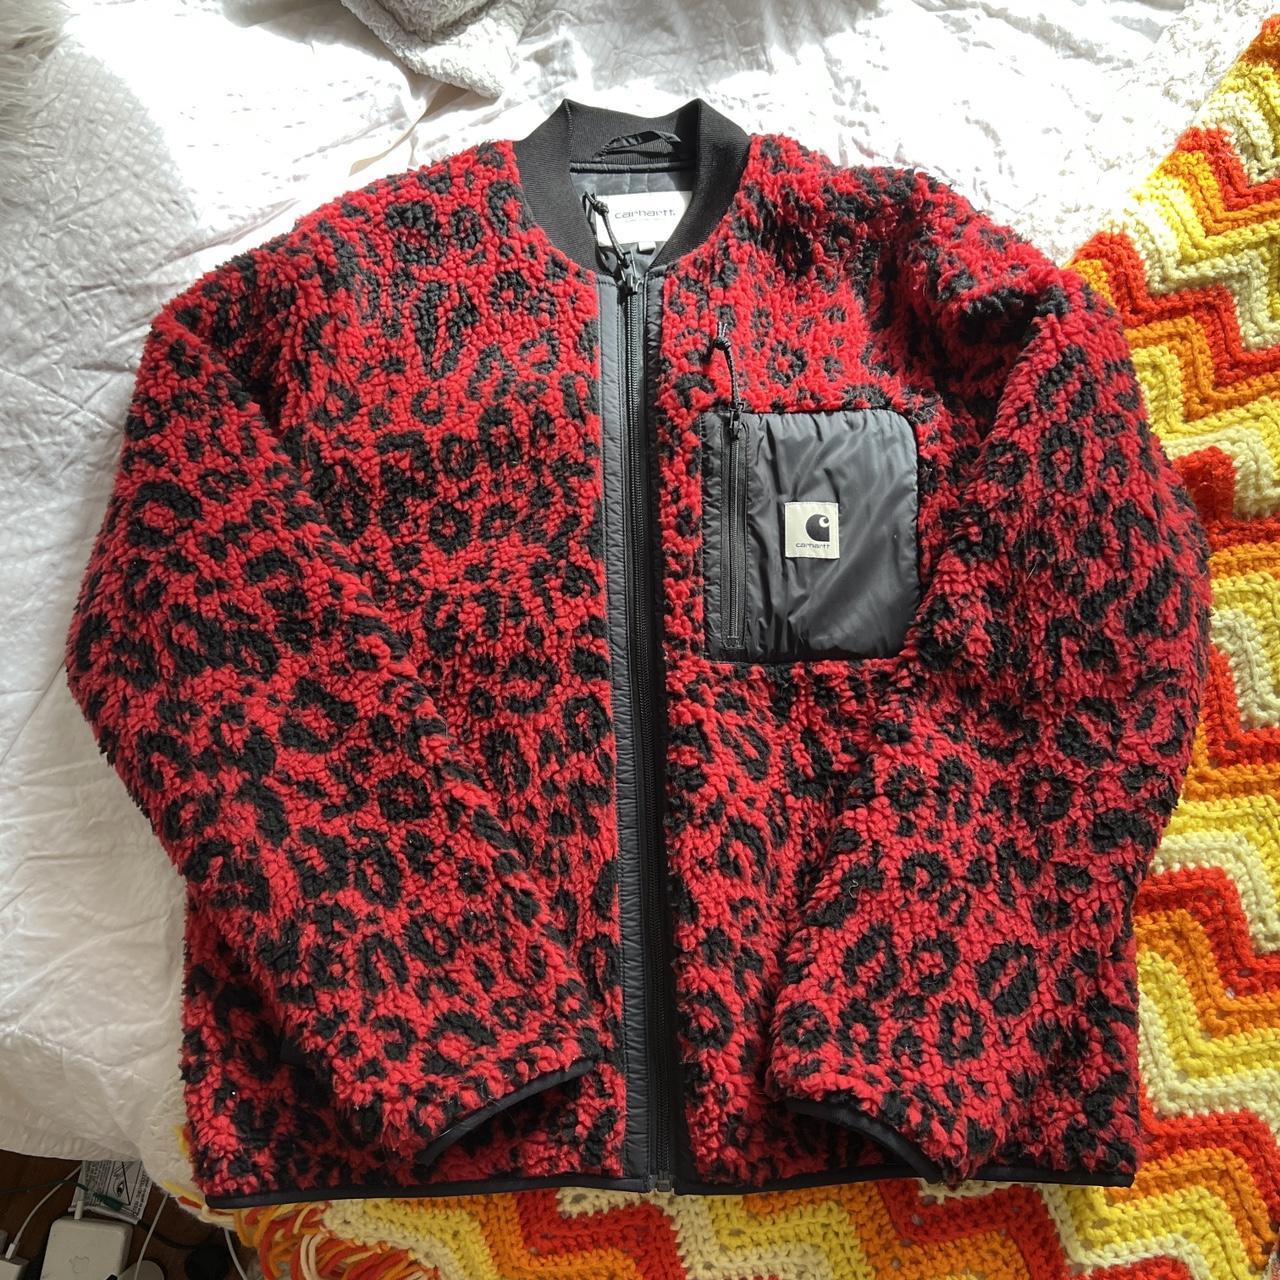 Aerie Lipstick Red Strappy Cheetah Print Non Lined - Depop